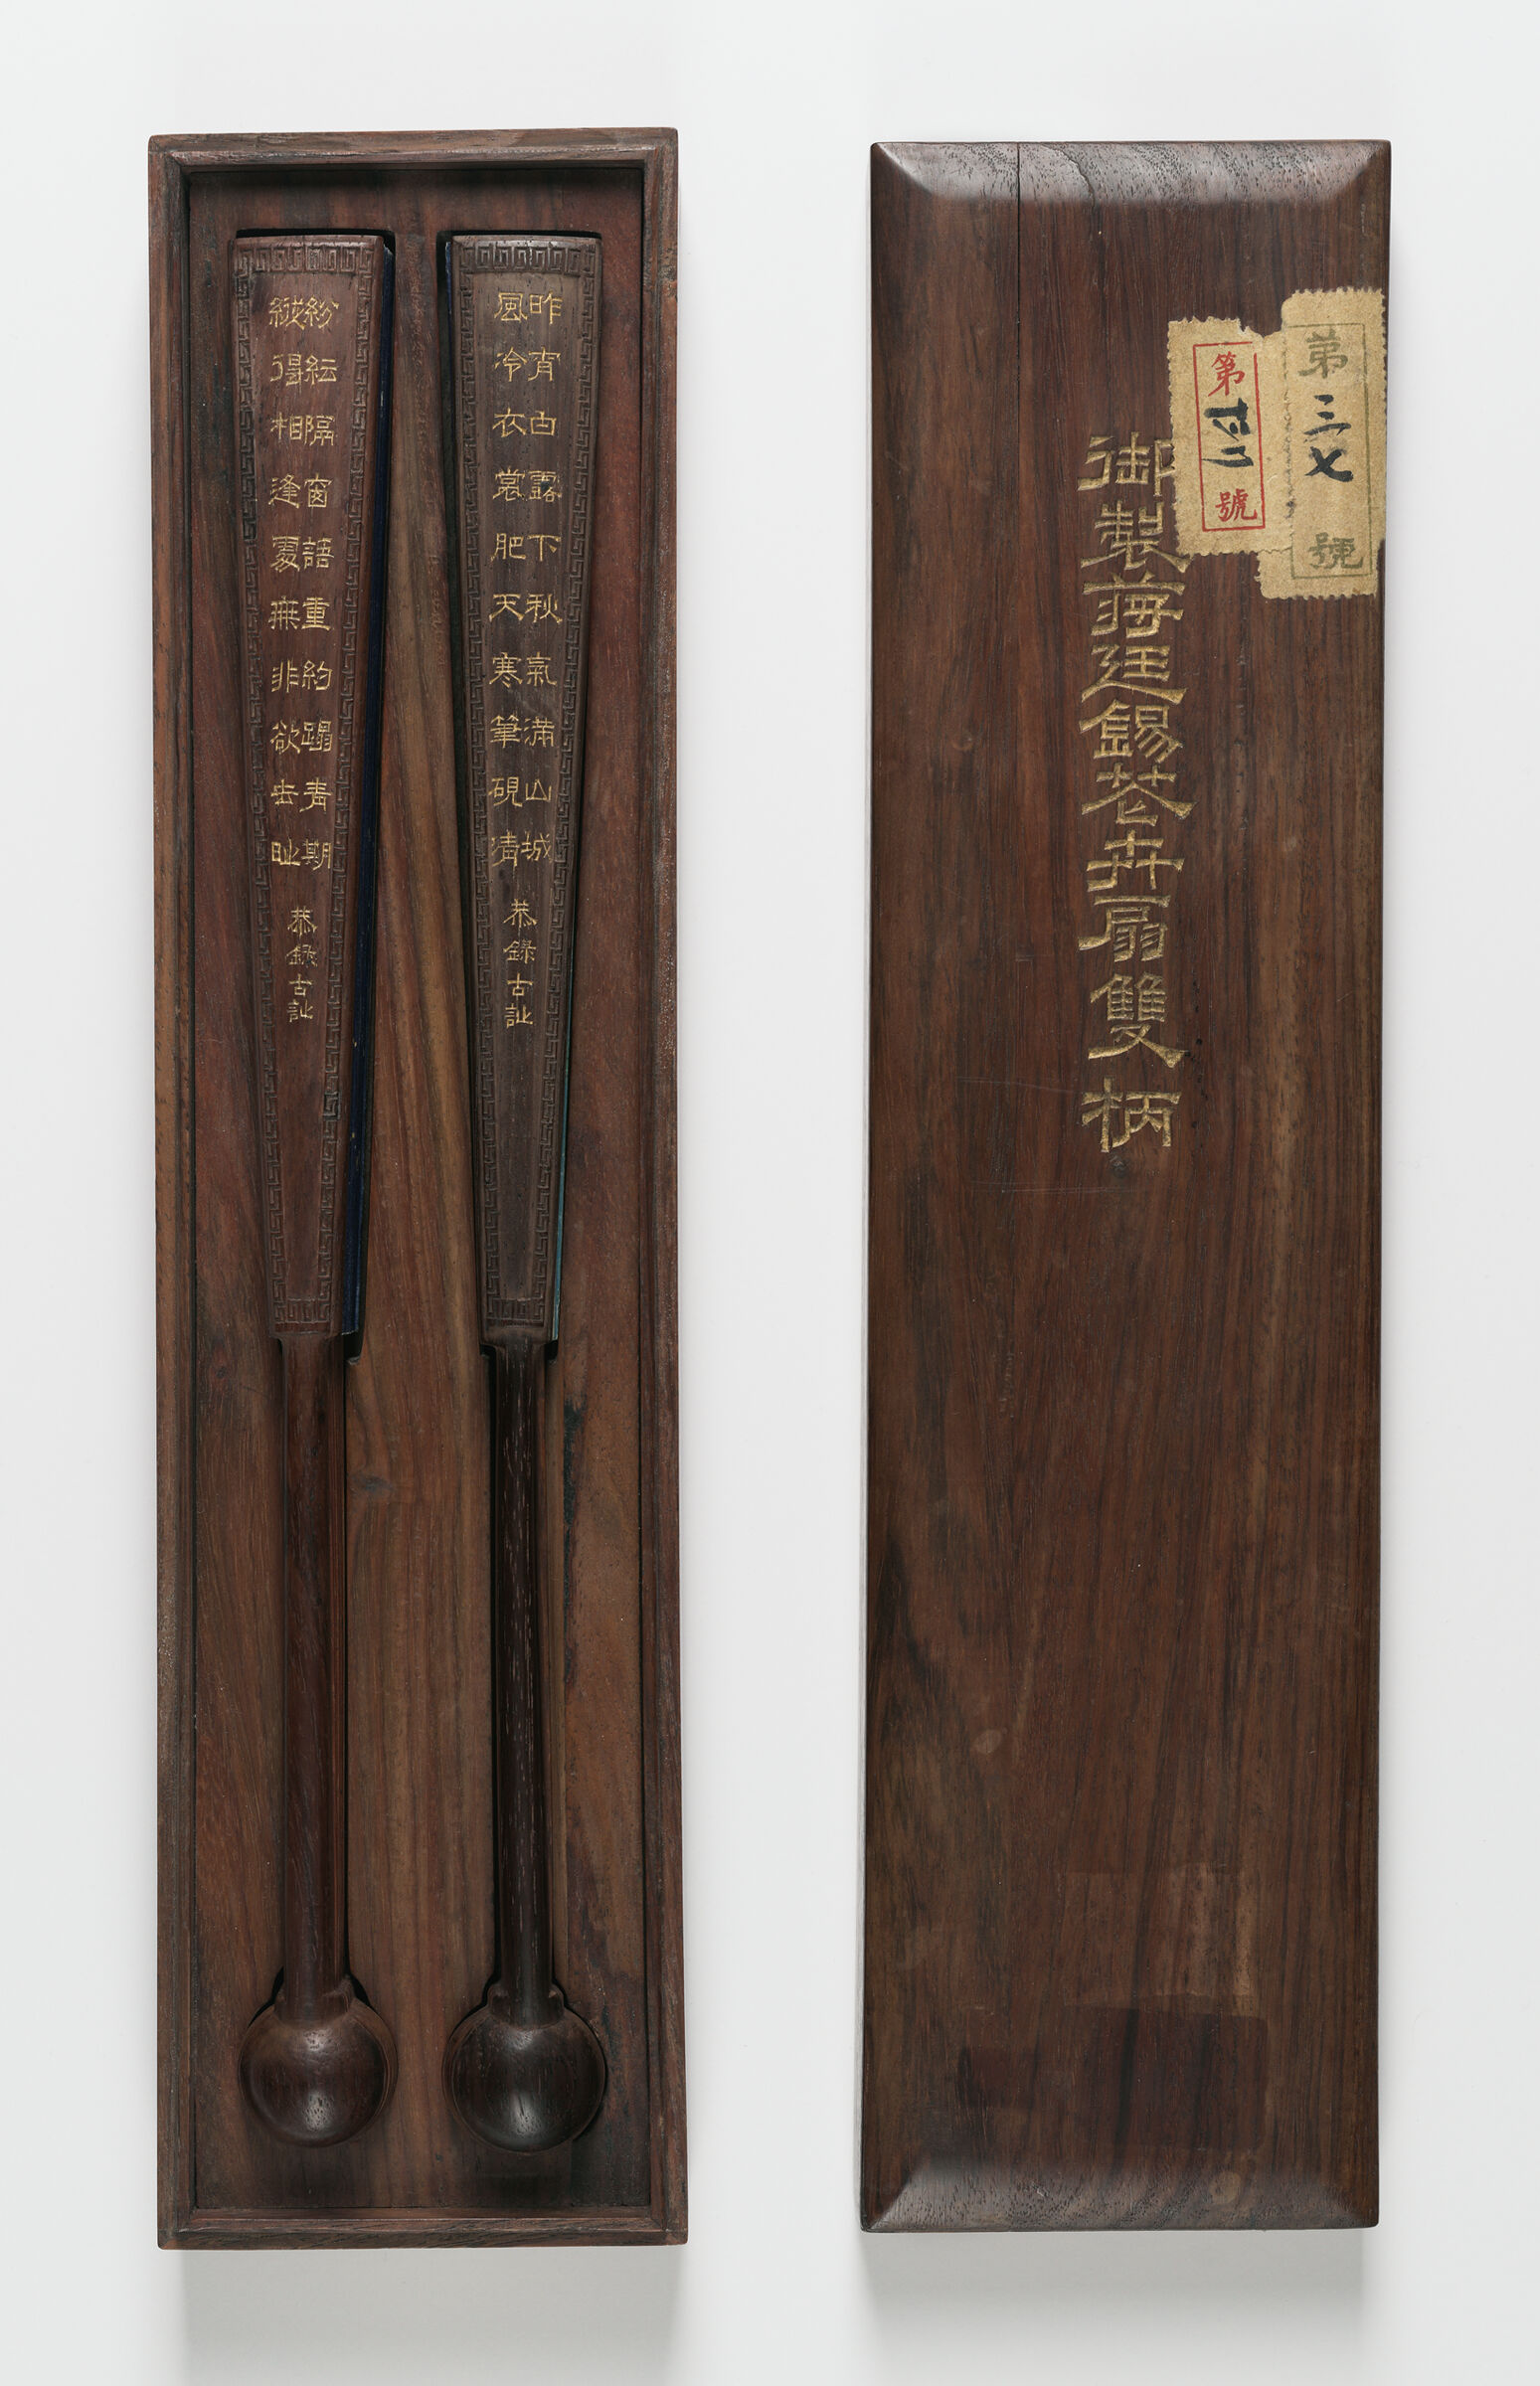 Pair Of Folding Fans With Paintings By Jiang Tingxi And Calligraphy By Wang Youdun